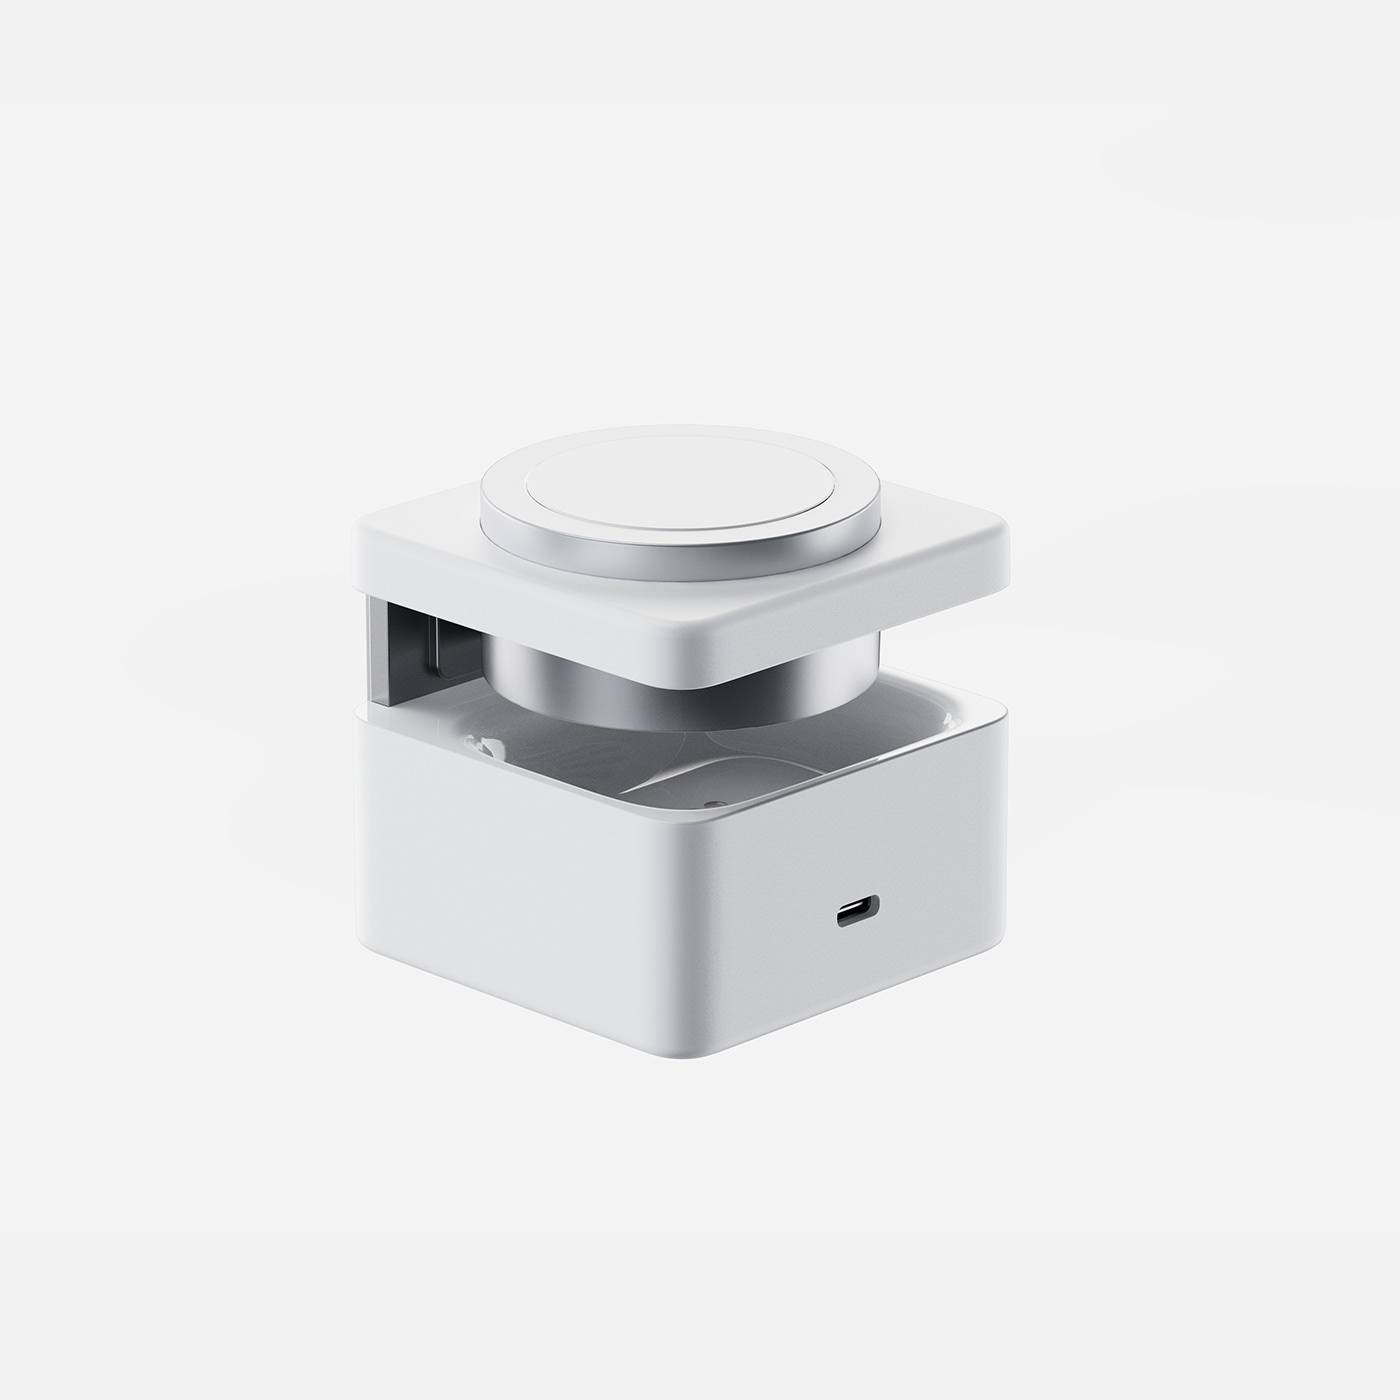 suosi product design  Wireless Charger iphone airpods apple watch industrial design 